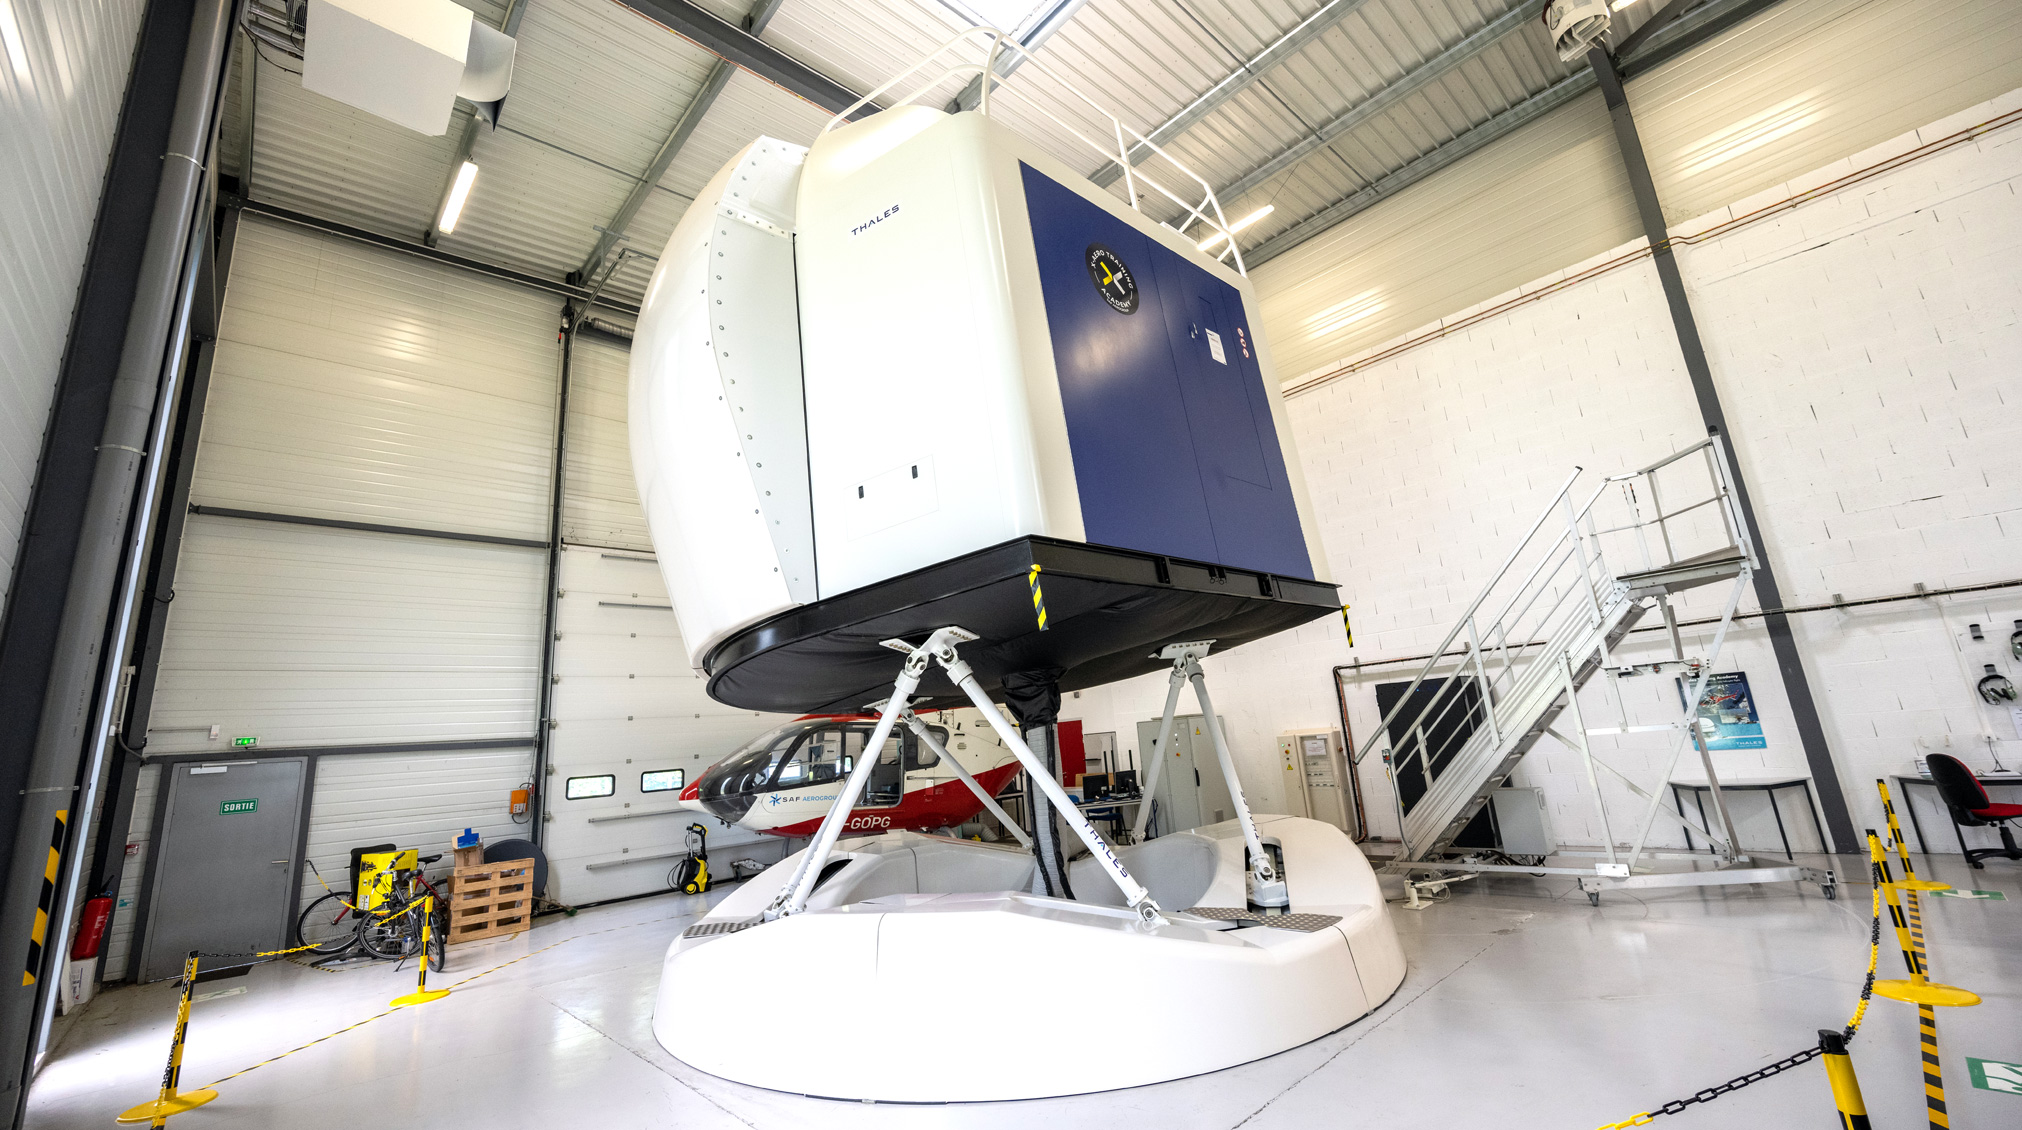 2014 Airbus AS350B3+ Simulator For Sale on AvPay by Aero Asset. View from the rear